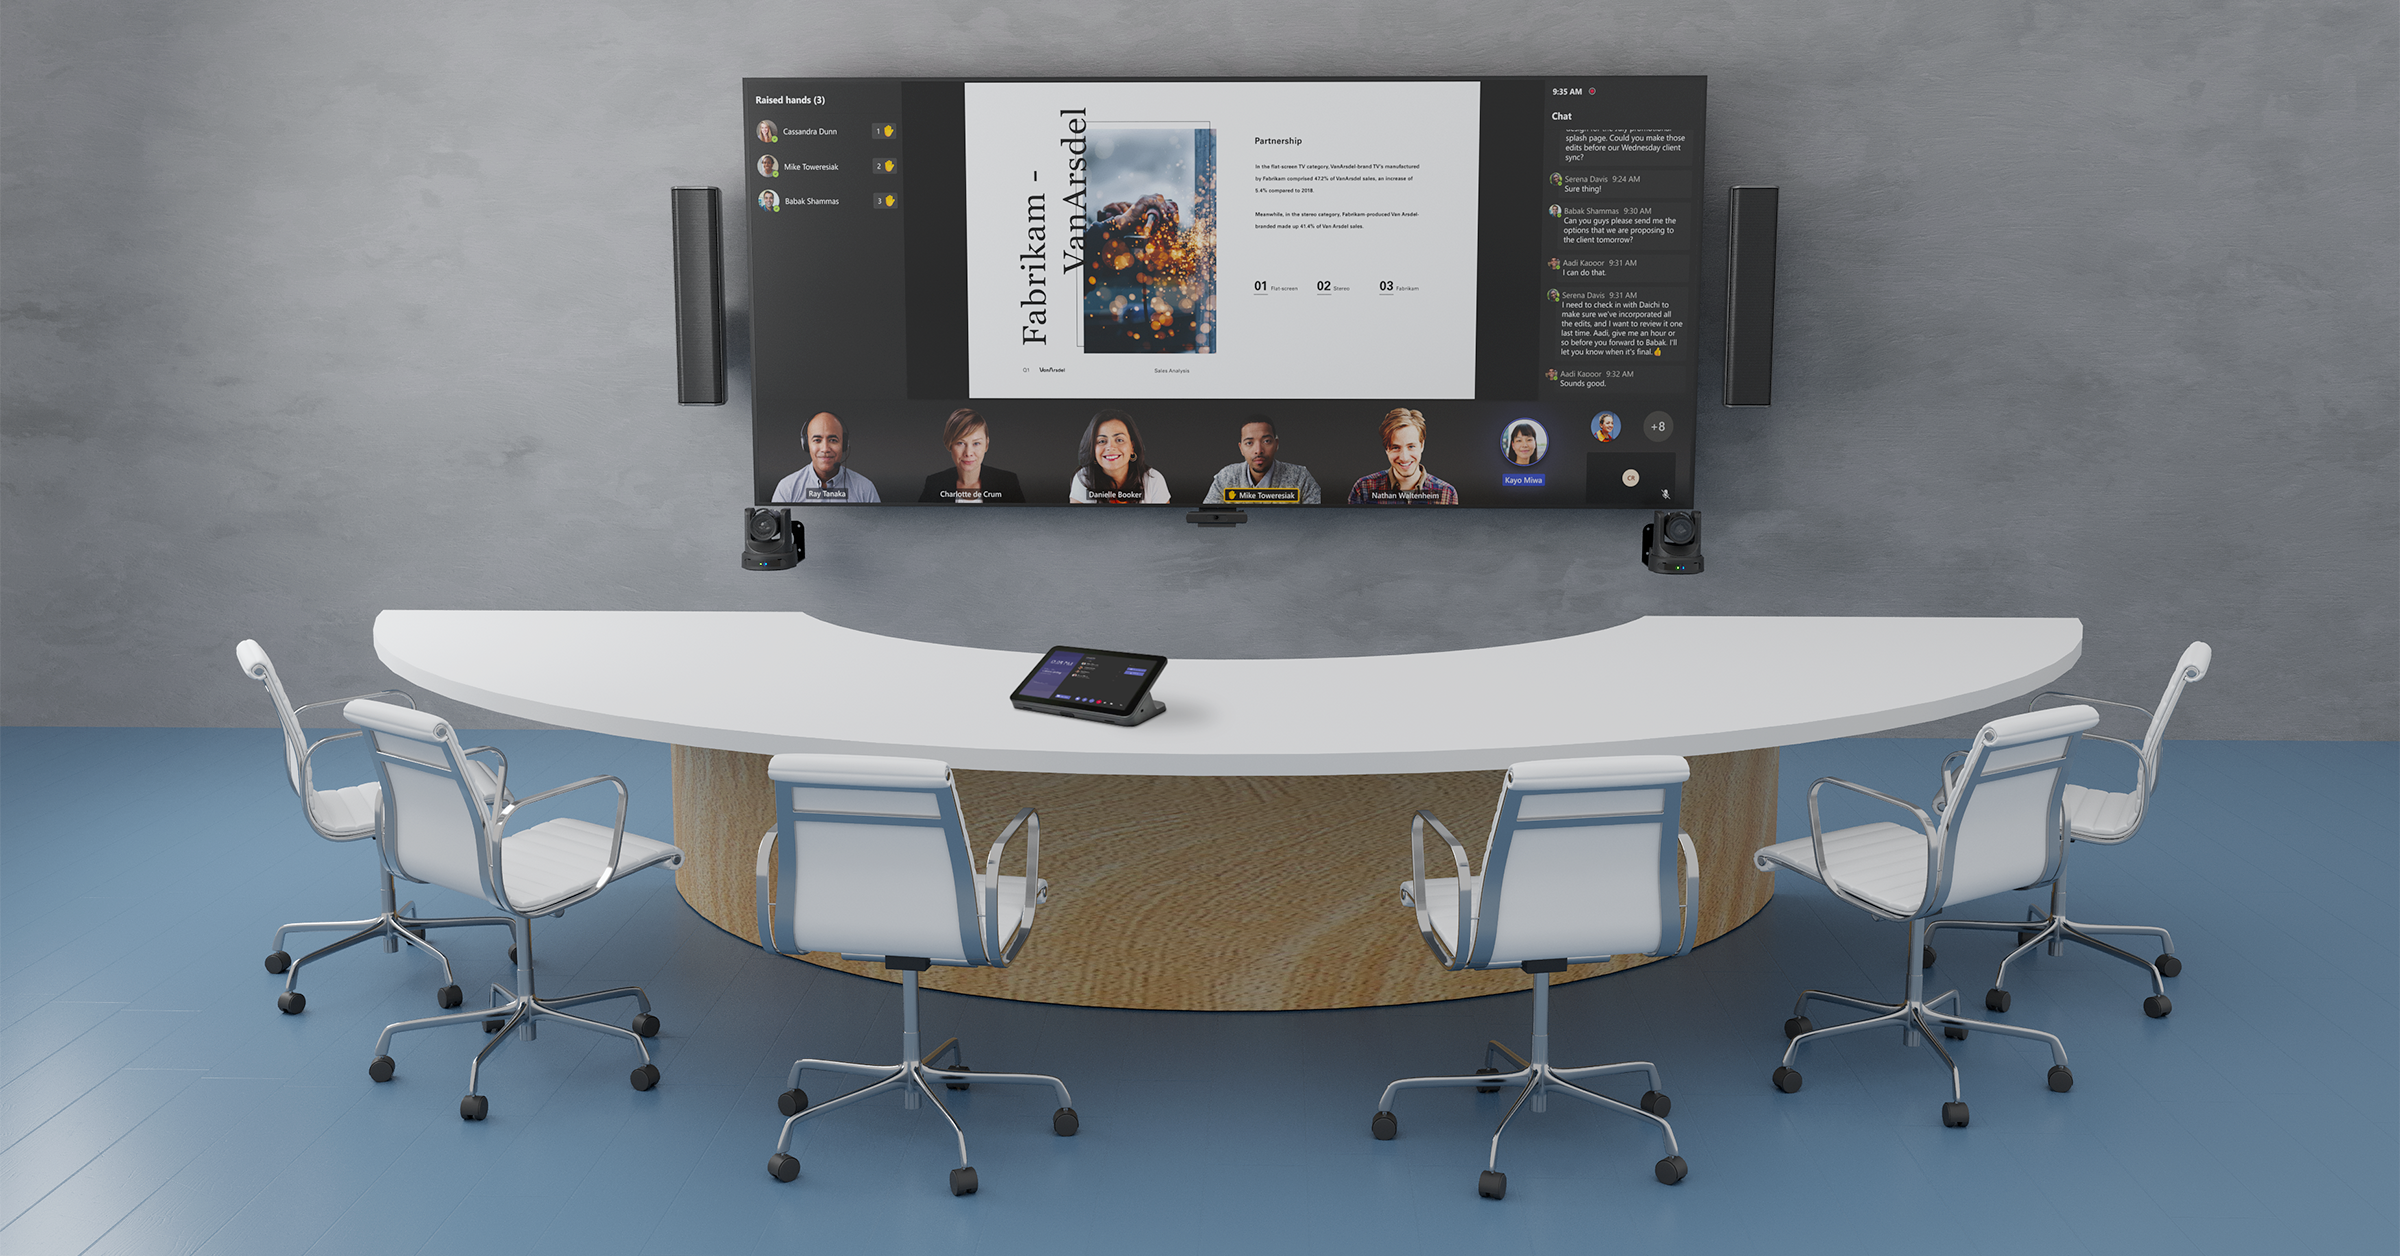 Q-SYS Delivers First Certified for Microsoft Teams Solution Supporting Spatial Audio in a Microsoft Teams Room